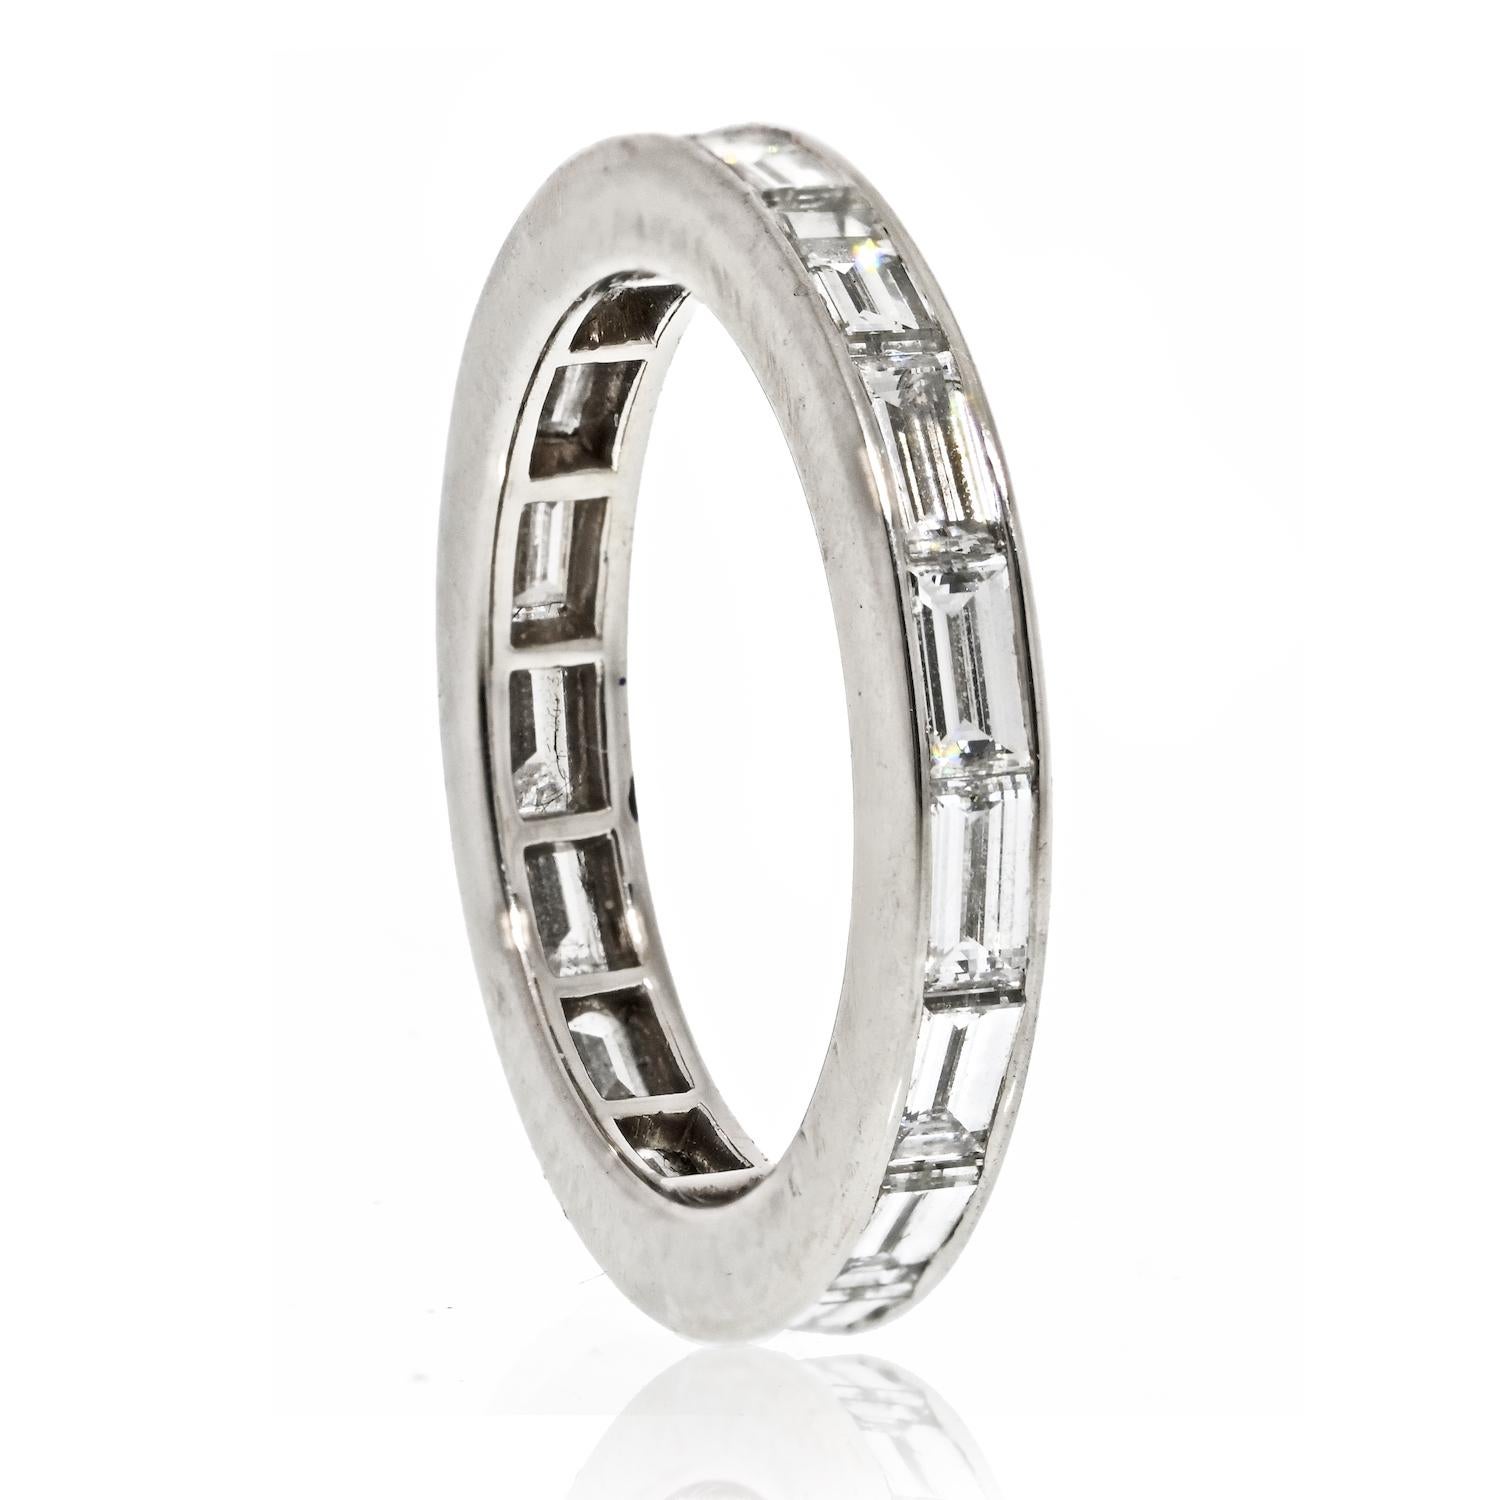 This Van Cleef & Arpels eternity band is an exquisite piece of jewelry that showcases the brand's commitment to quality and craftsmanship. Made from Platinum, the band features a total of 2.50 carats of baguette cut diamonds that run horizontally